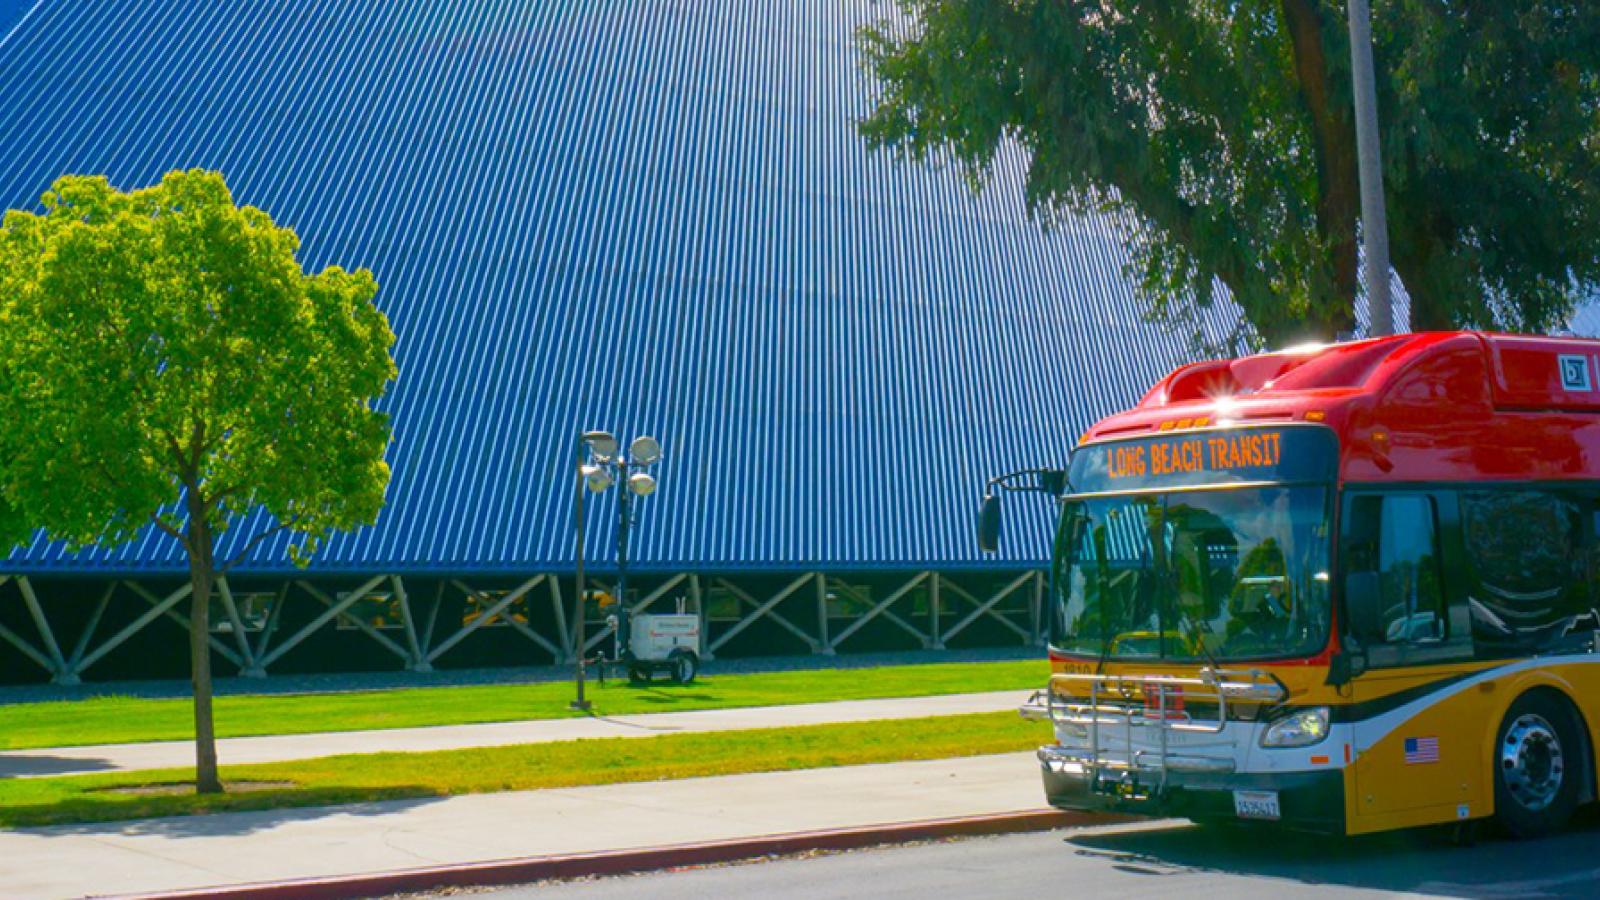 Bus in front of Walter Pyramid